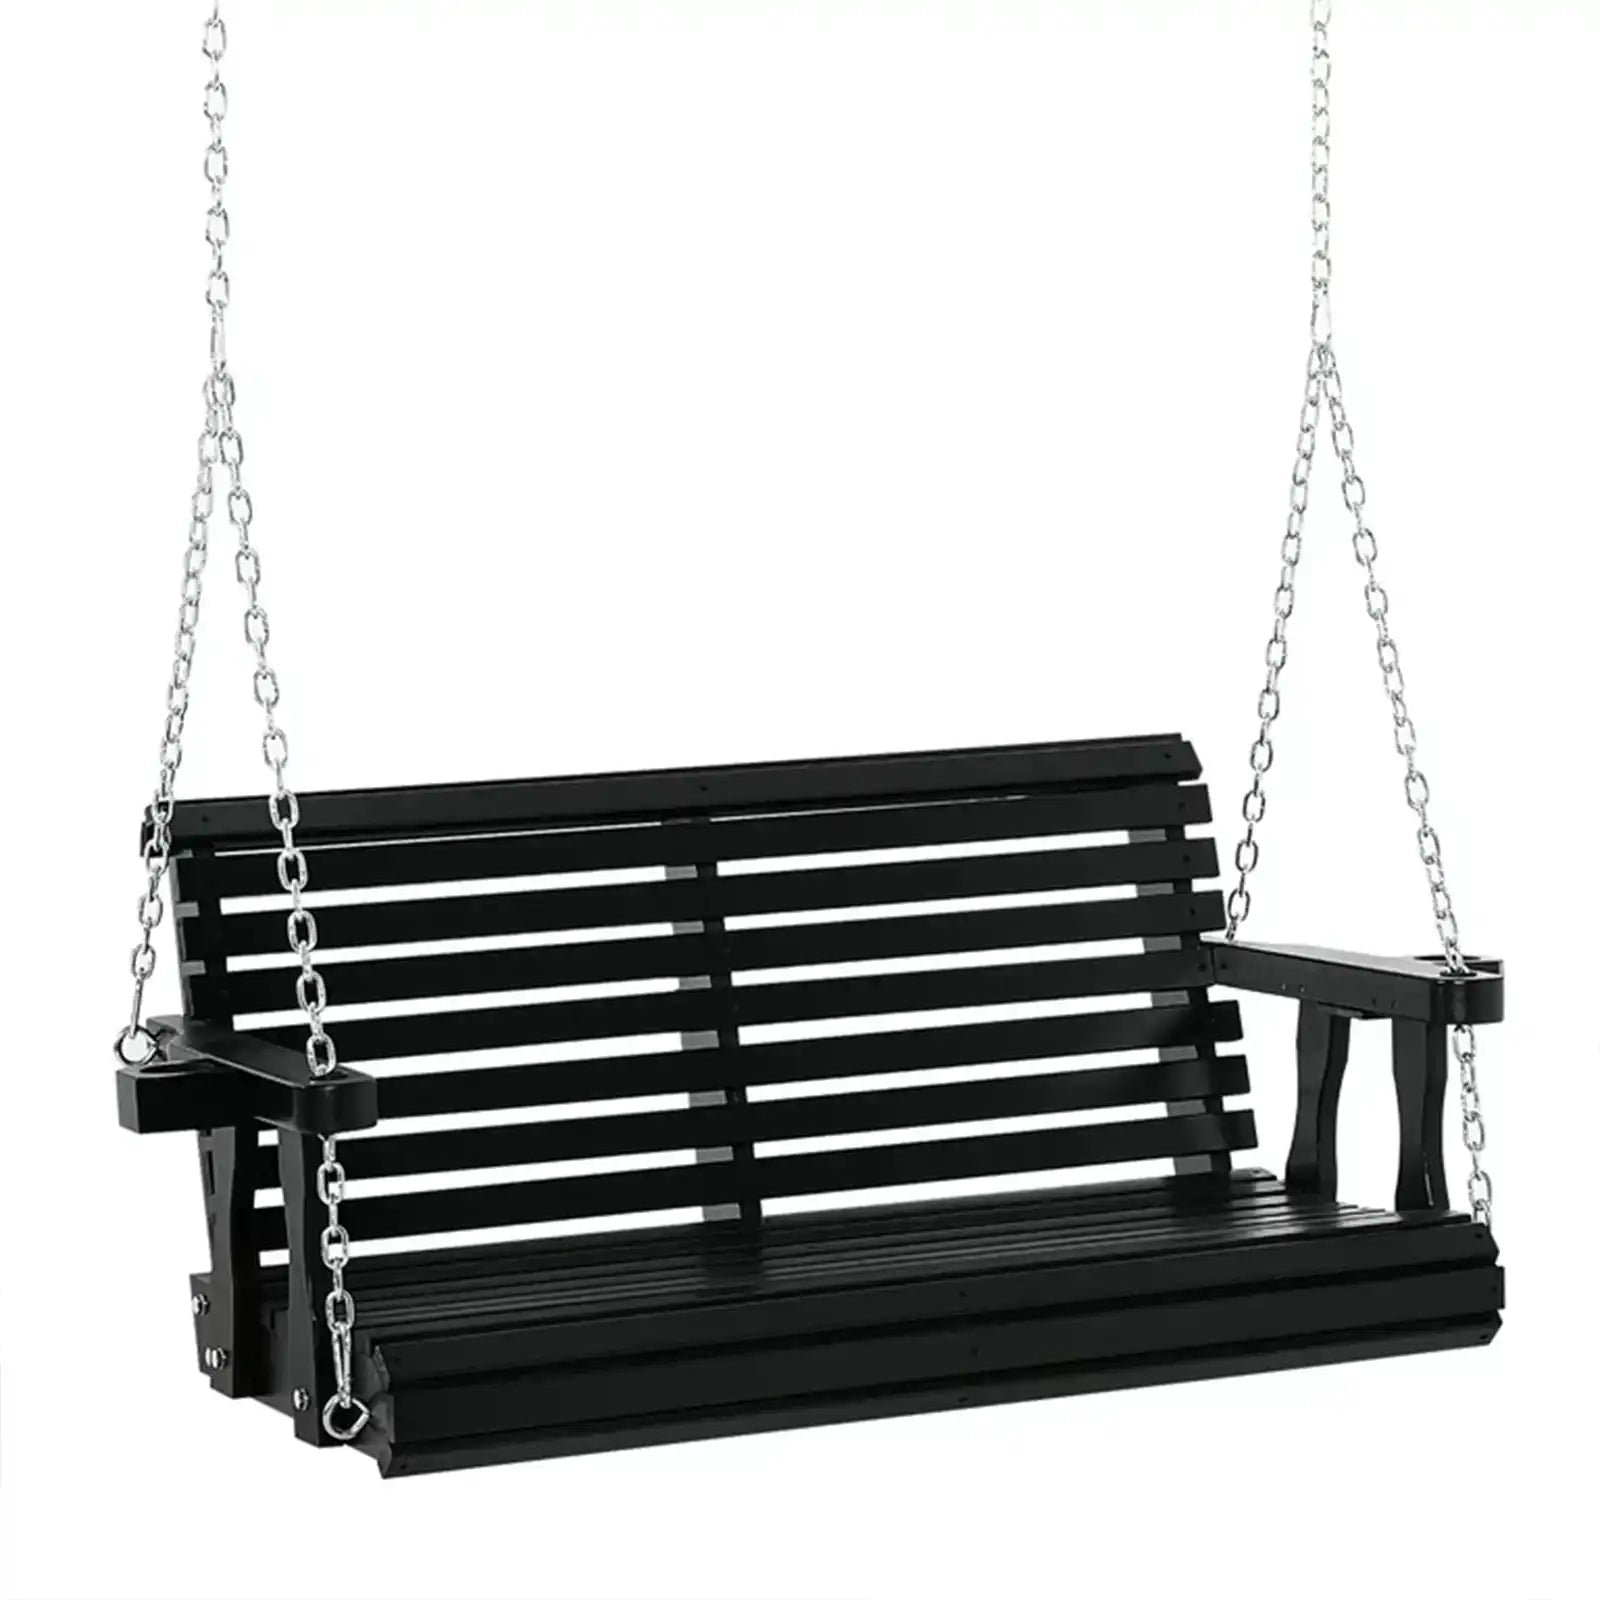 Porch Swing with Chains and Cupholders, 2 Person Wooden Patio Swing Chair for Garden, Poolside, Backyard